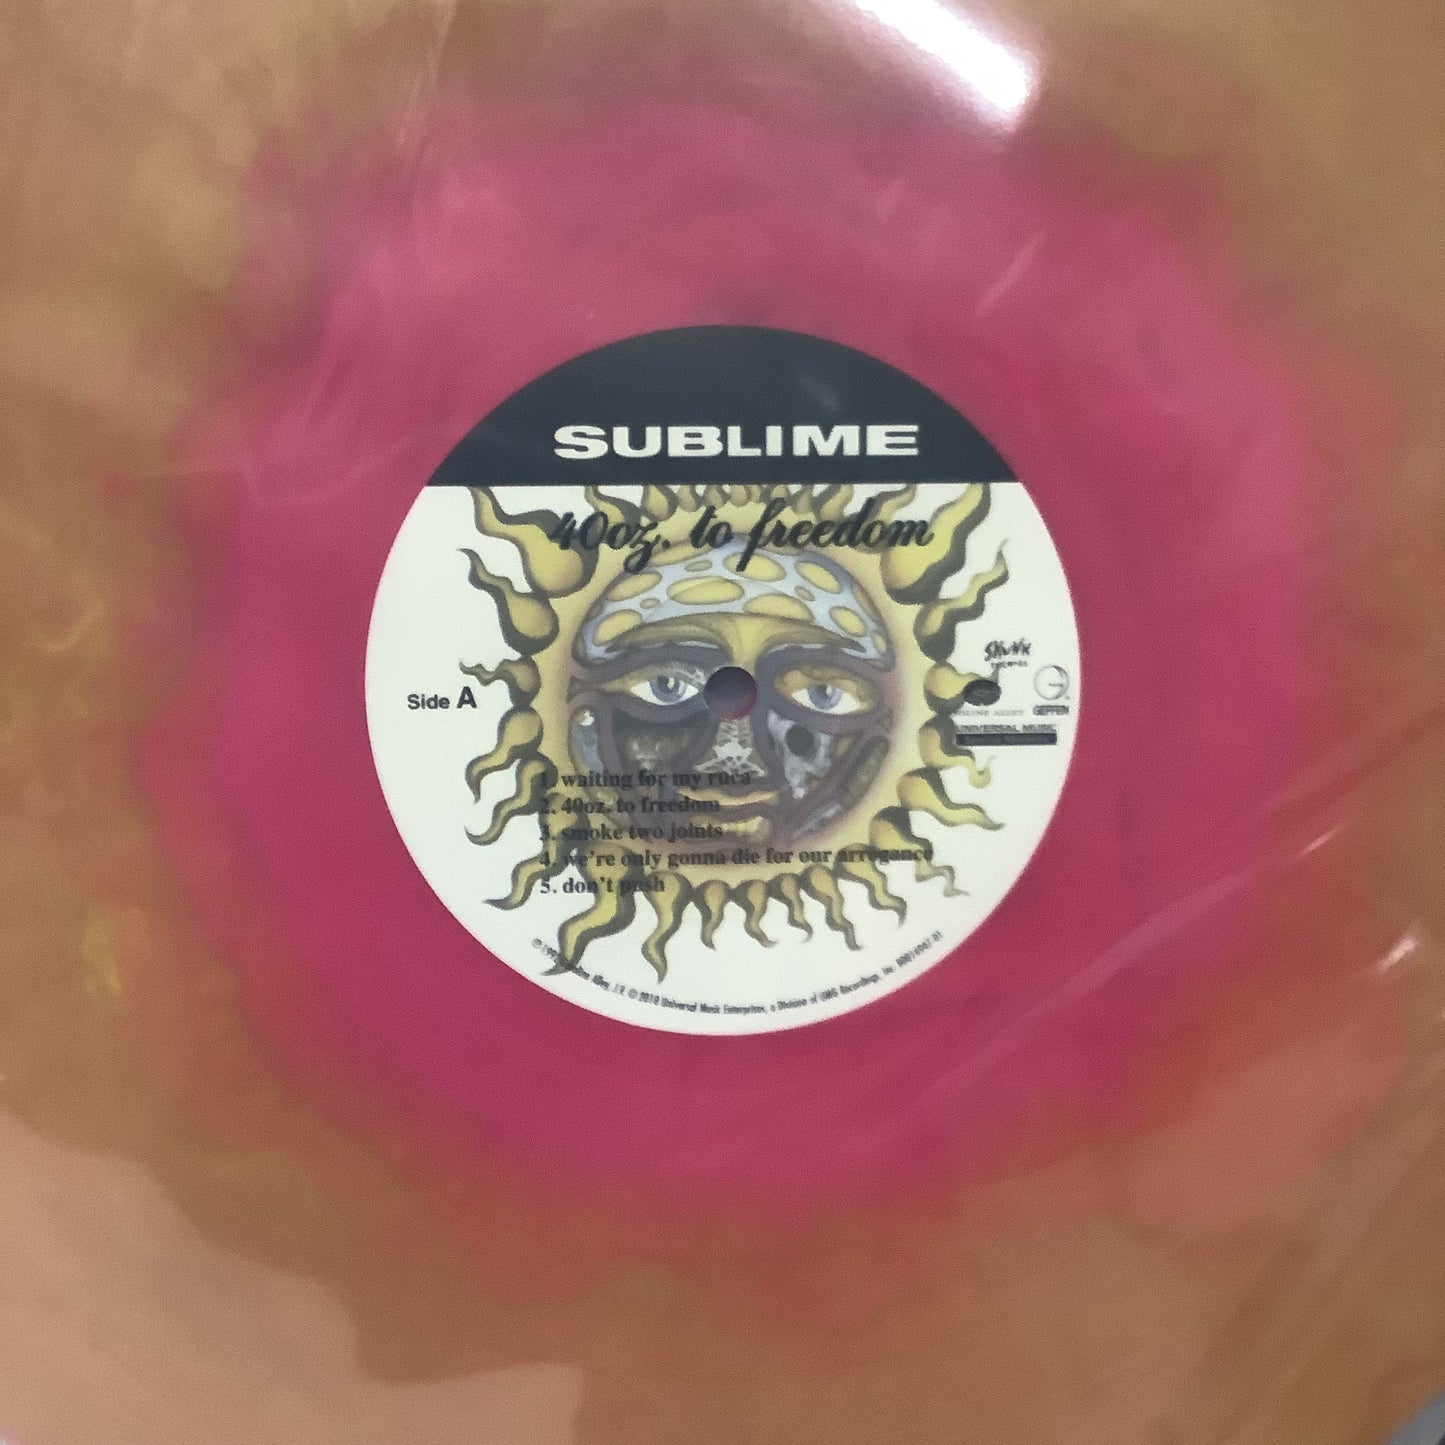 Sublime - 40oz To Freedom - LP